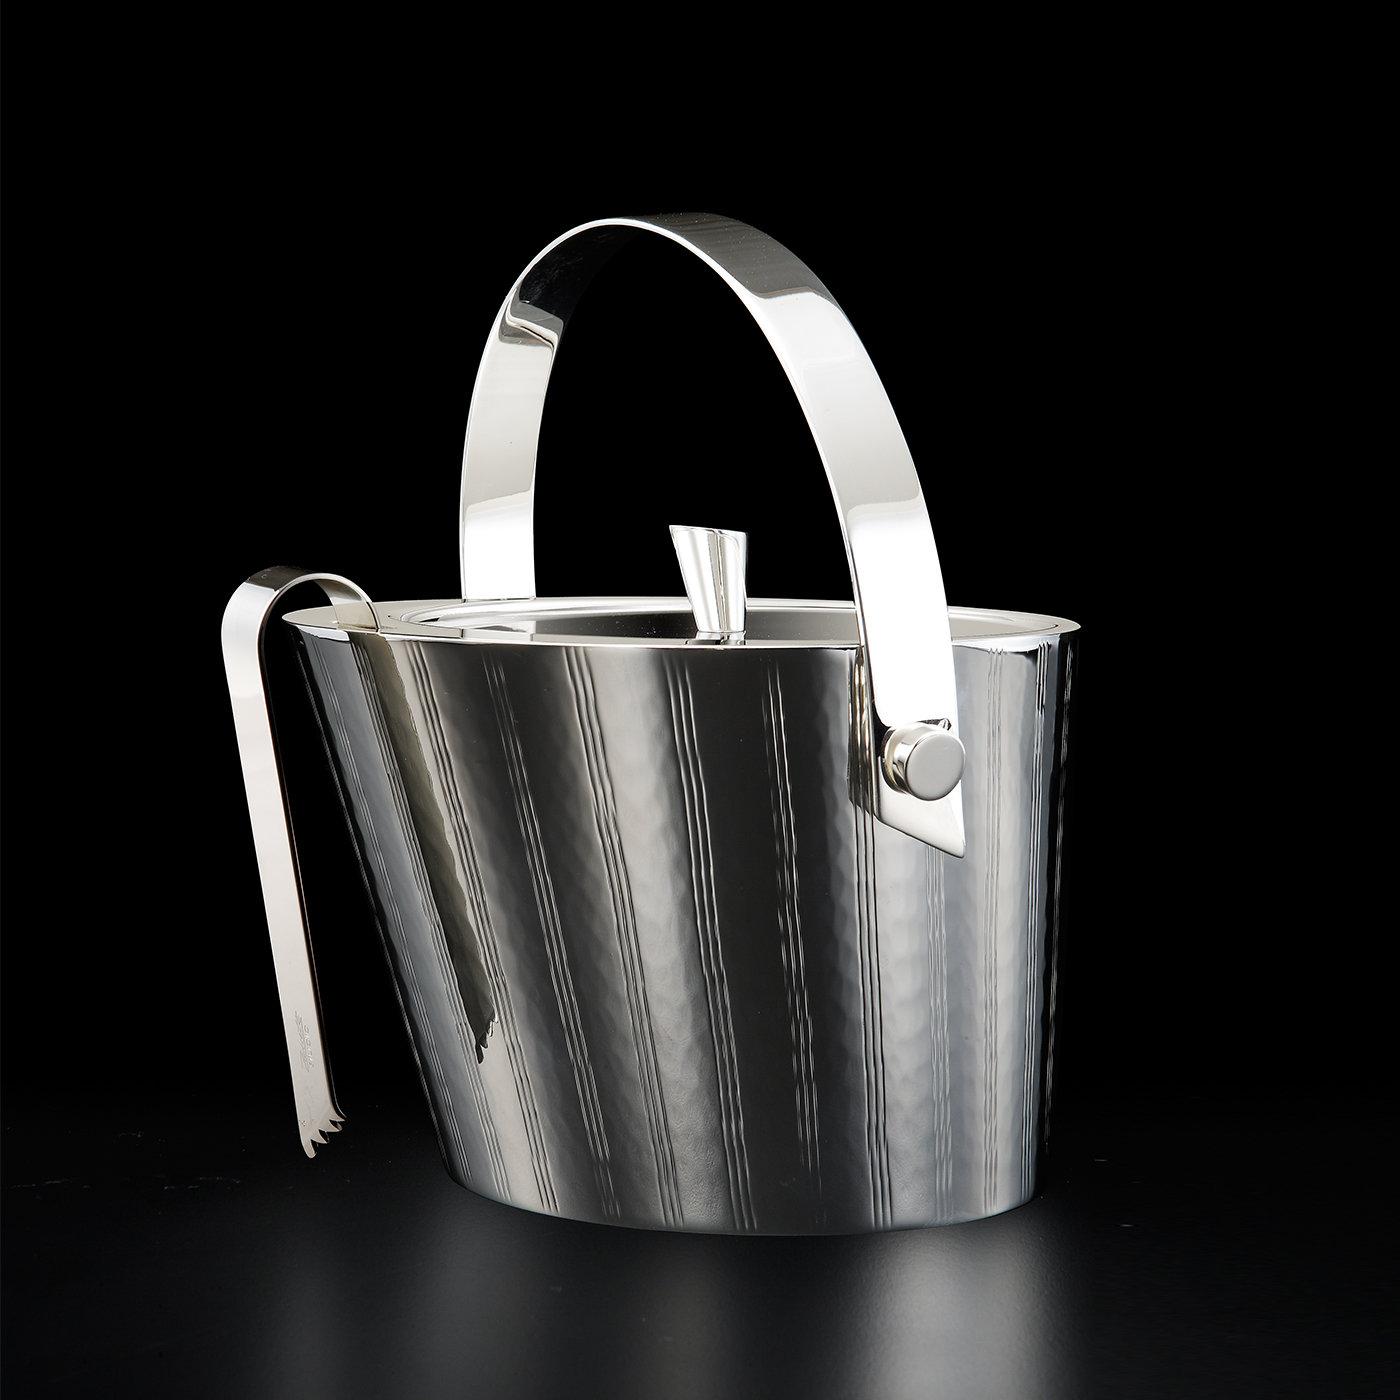 Sophisticated ice bucket complete with tongs handcrafted in a fine silver-plated alloy by master silversmith Zanetto.